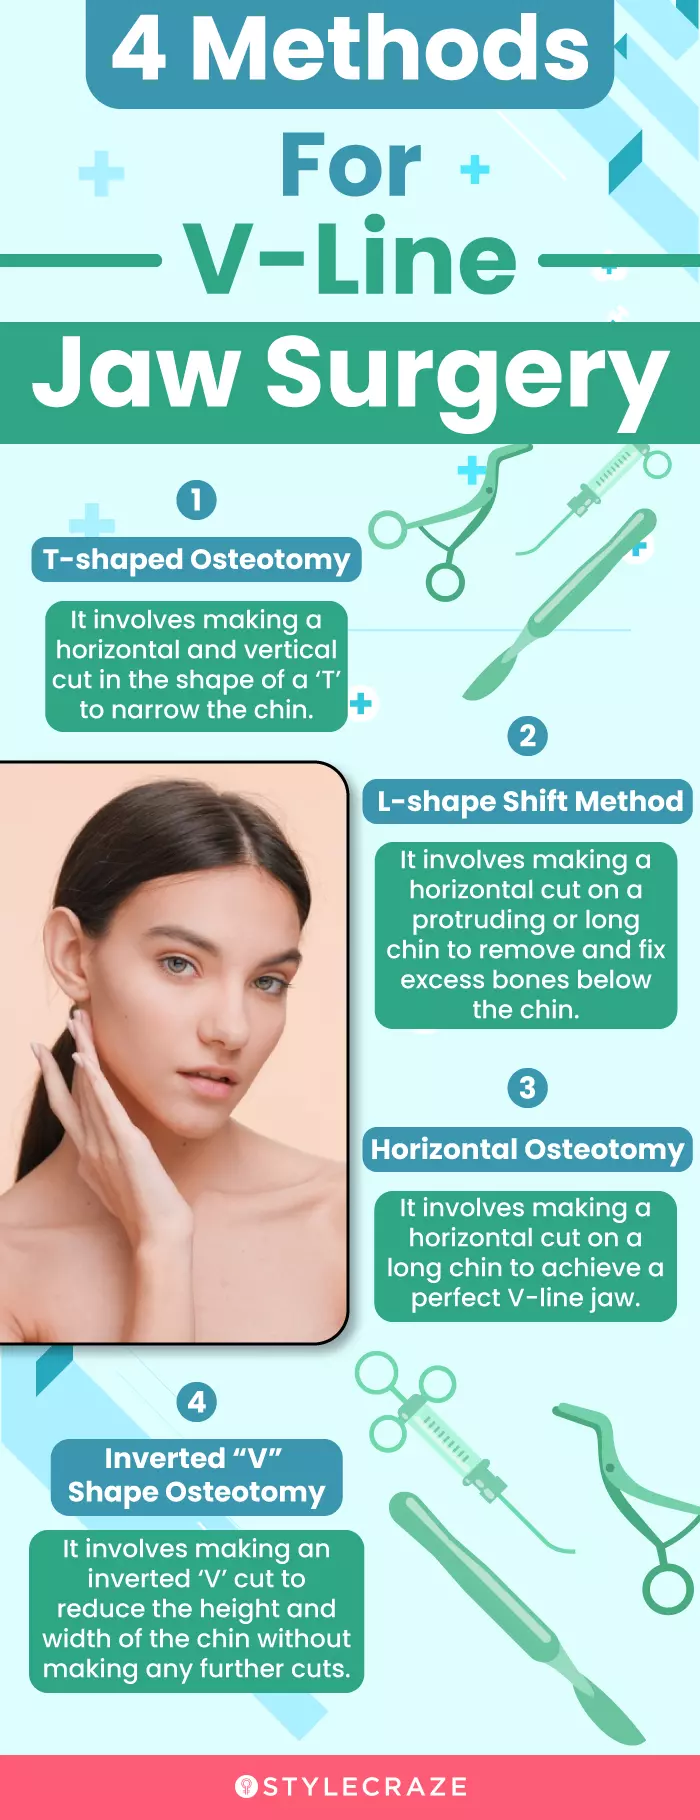 4 methods for vline jaw surgery (infographic)